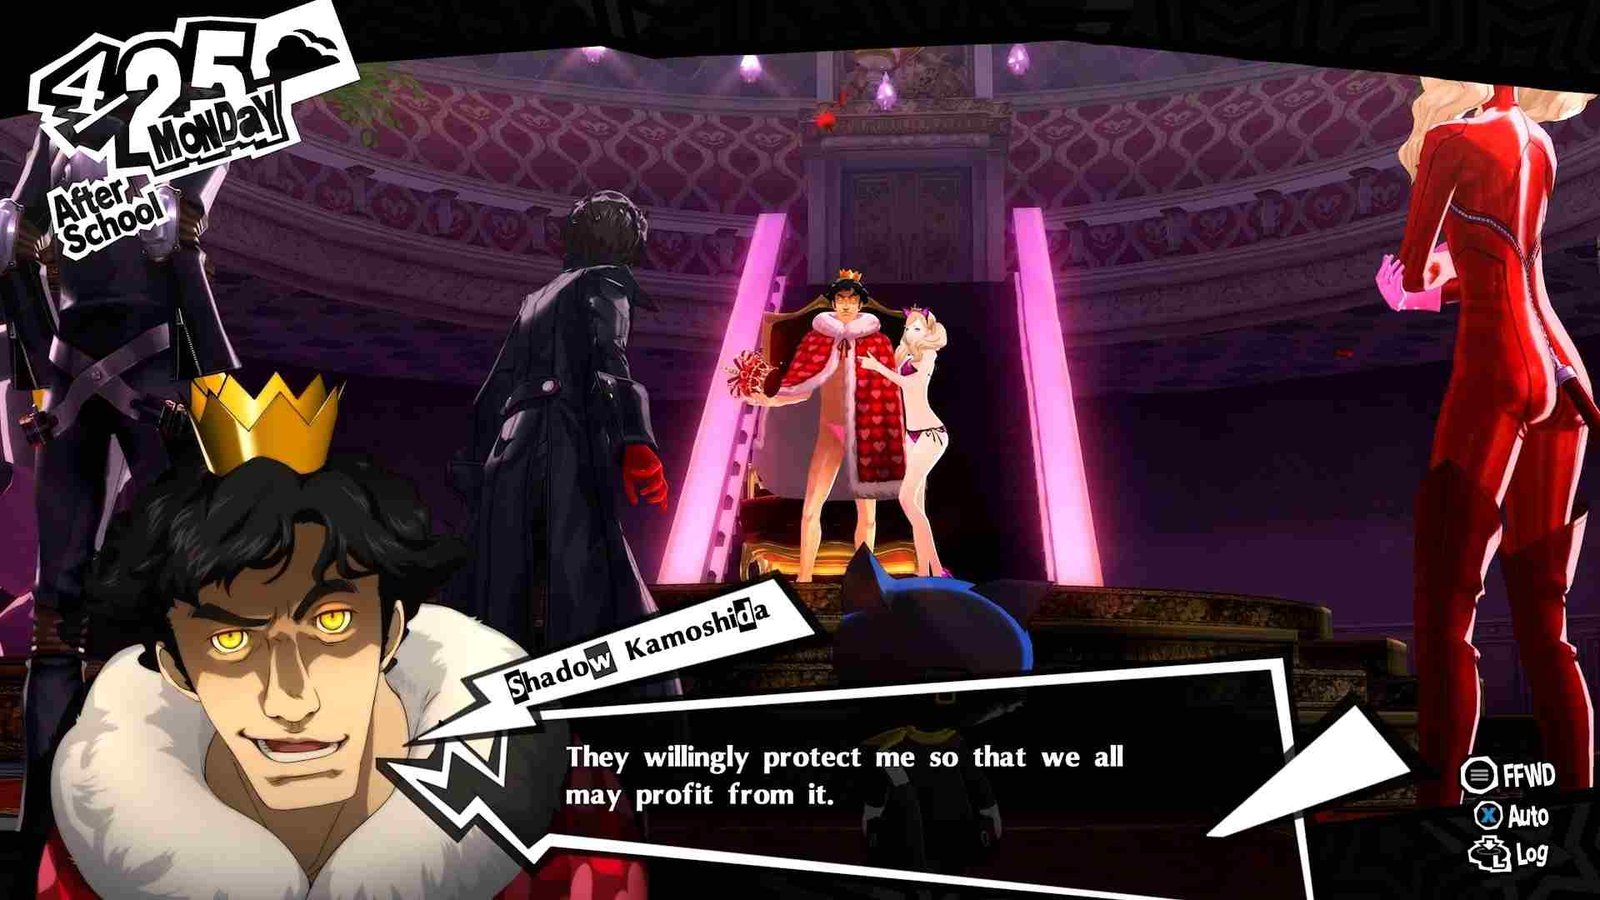 Does Persona 5 Royal support Multiplayer?